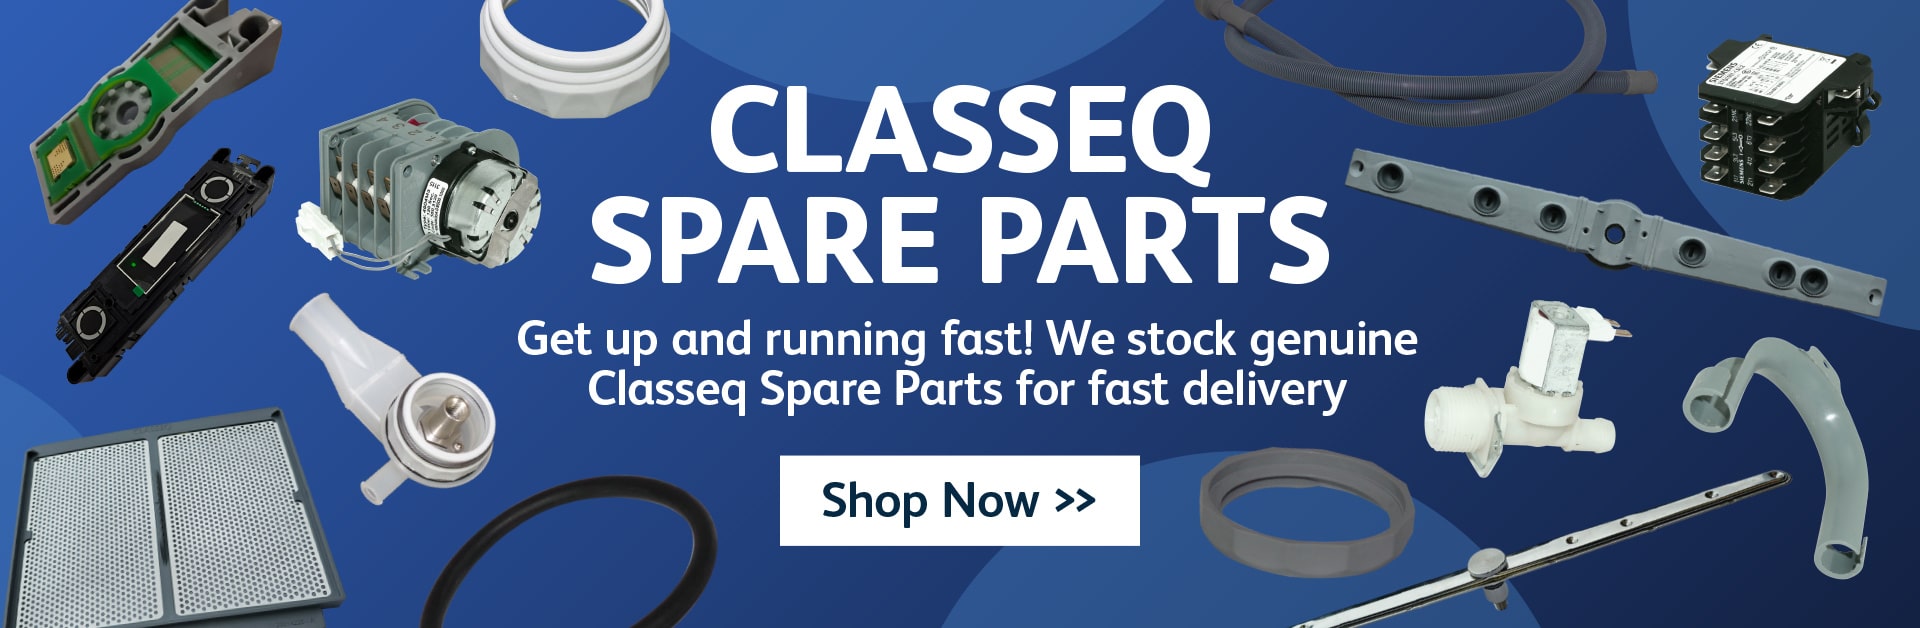 Suppliers of Classeq glasswashing & dishwashing Spare Parts. Learn more.